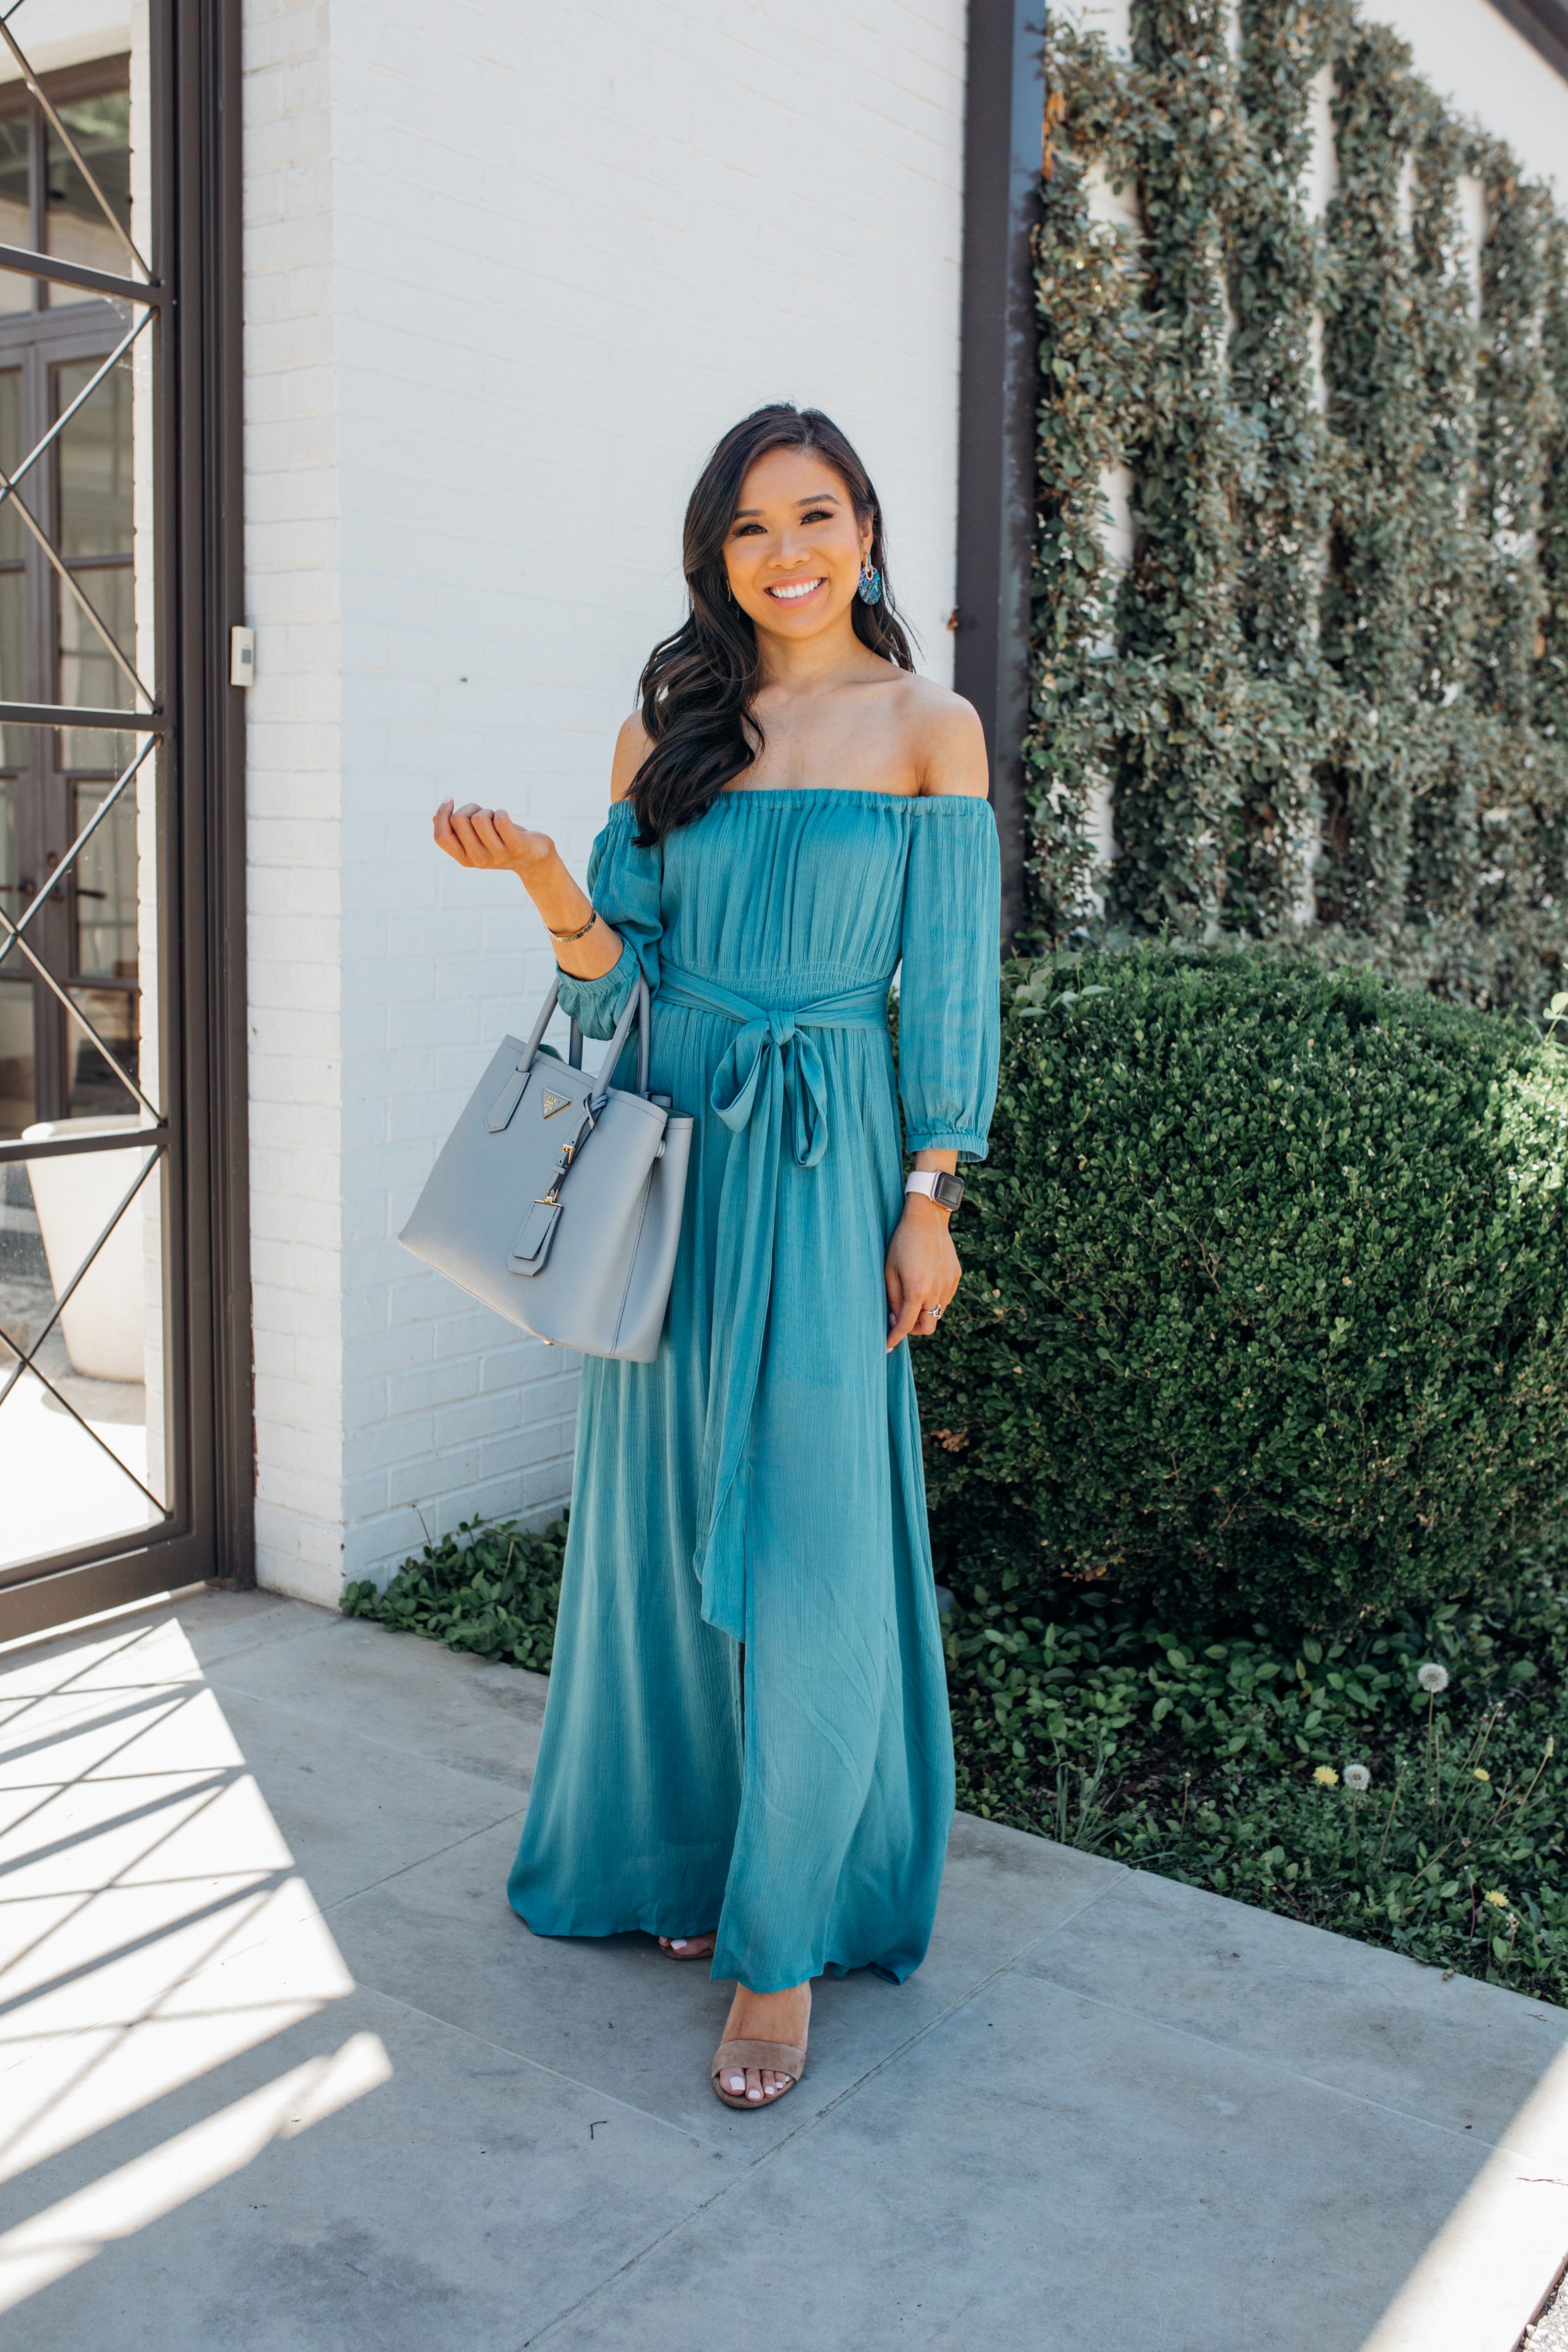 Blogger Hoang-Kim wears a teal off-the-shoulder maxi